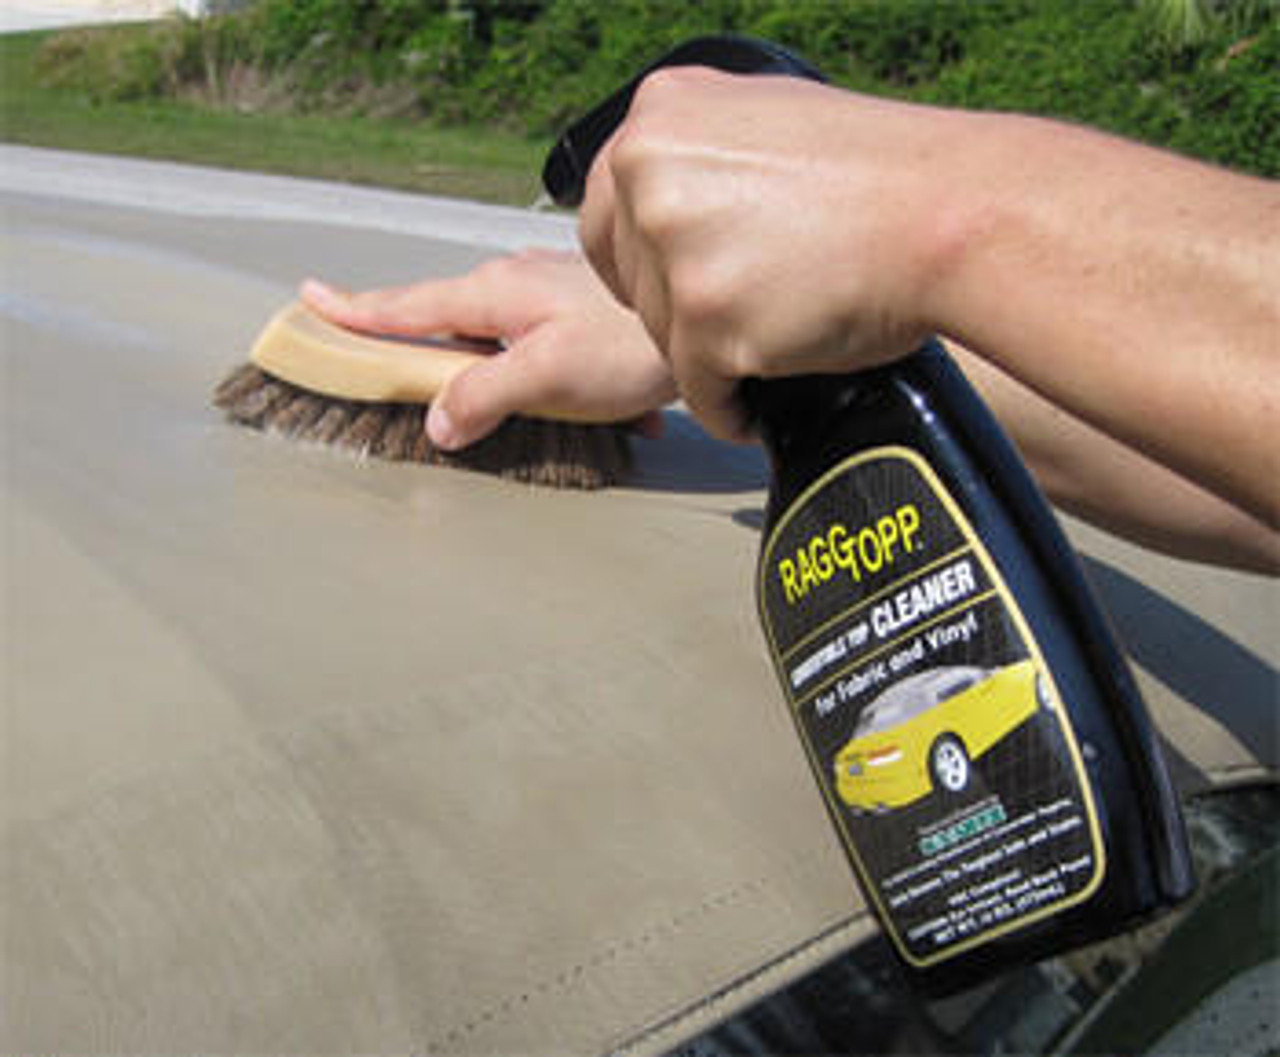 RaggTopp Convertible Top Plastic Window Cleaner and Protectant Kit